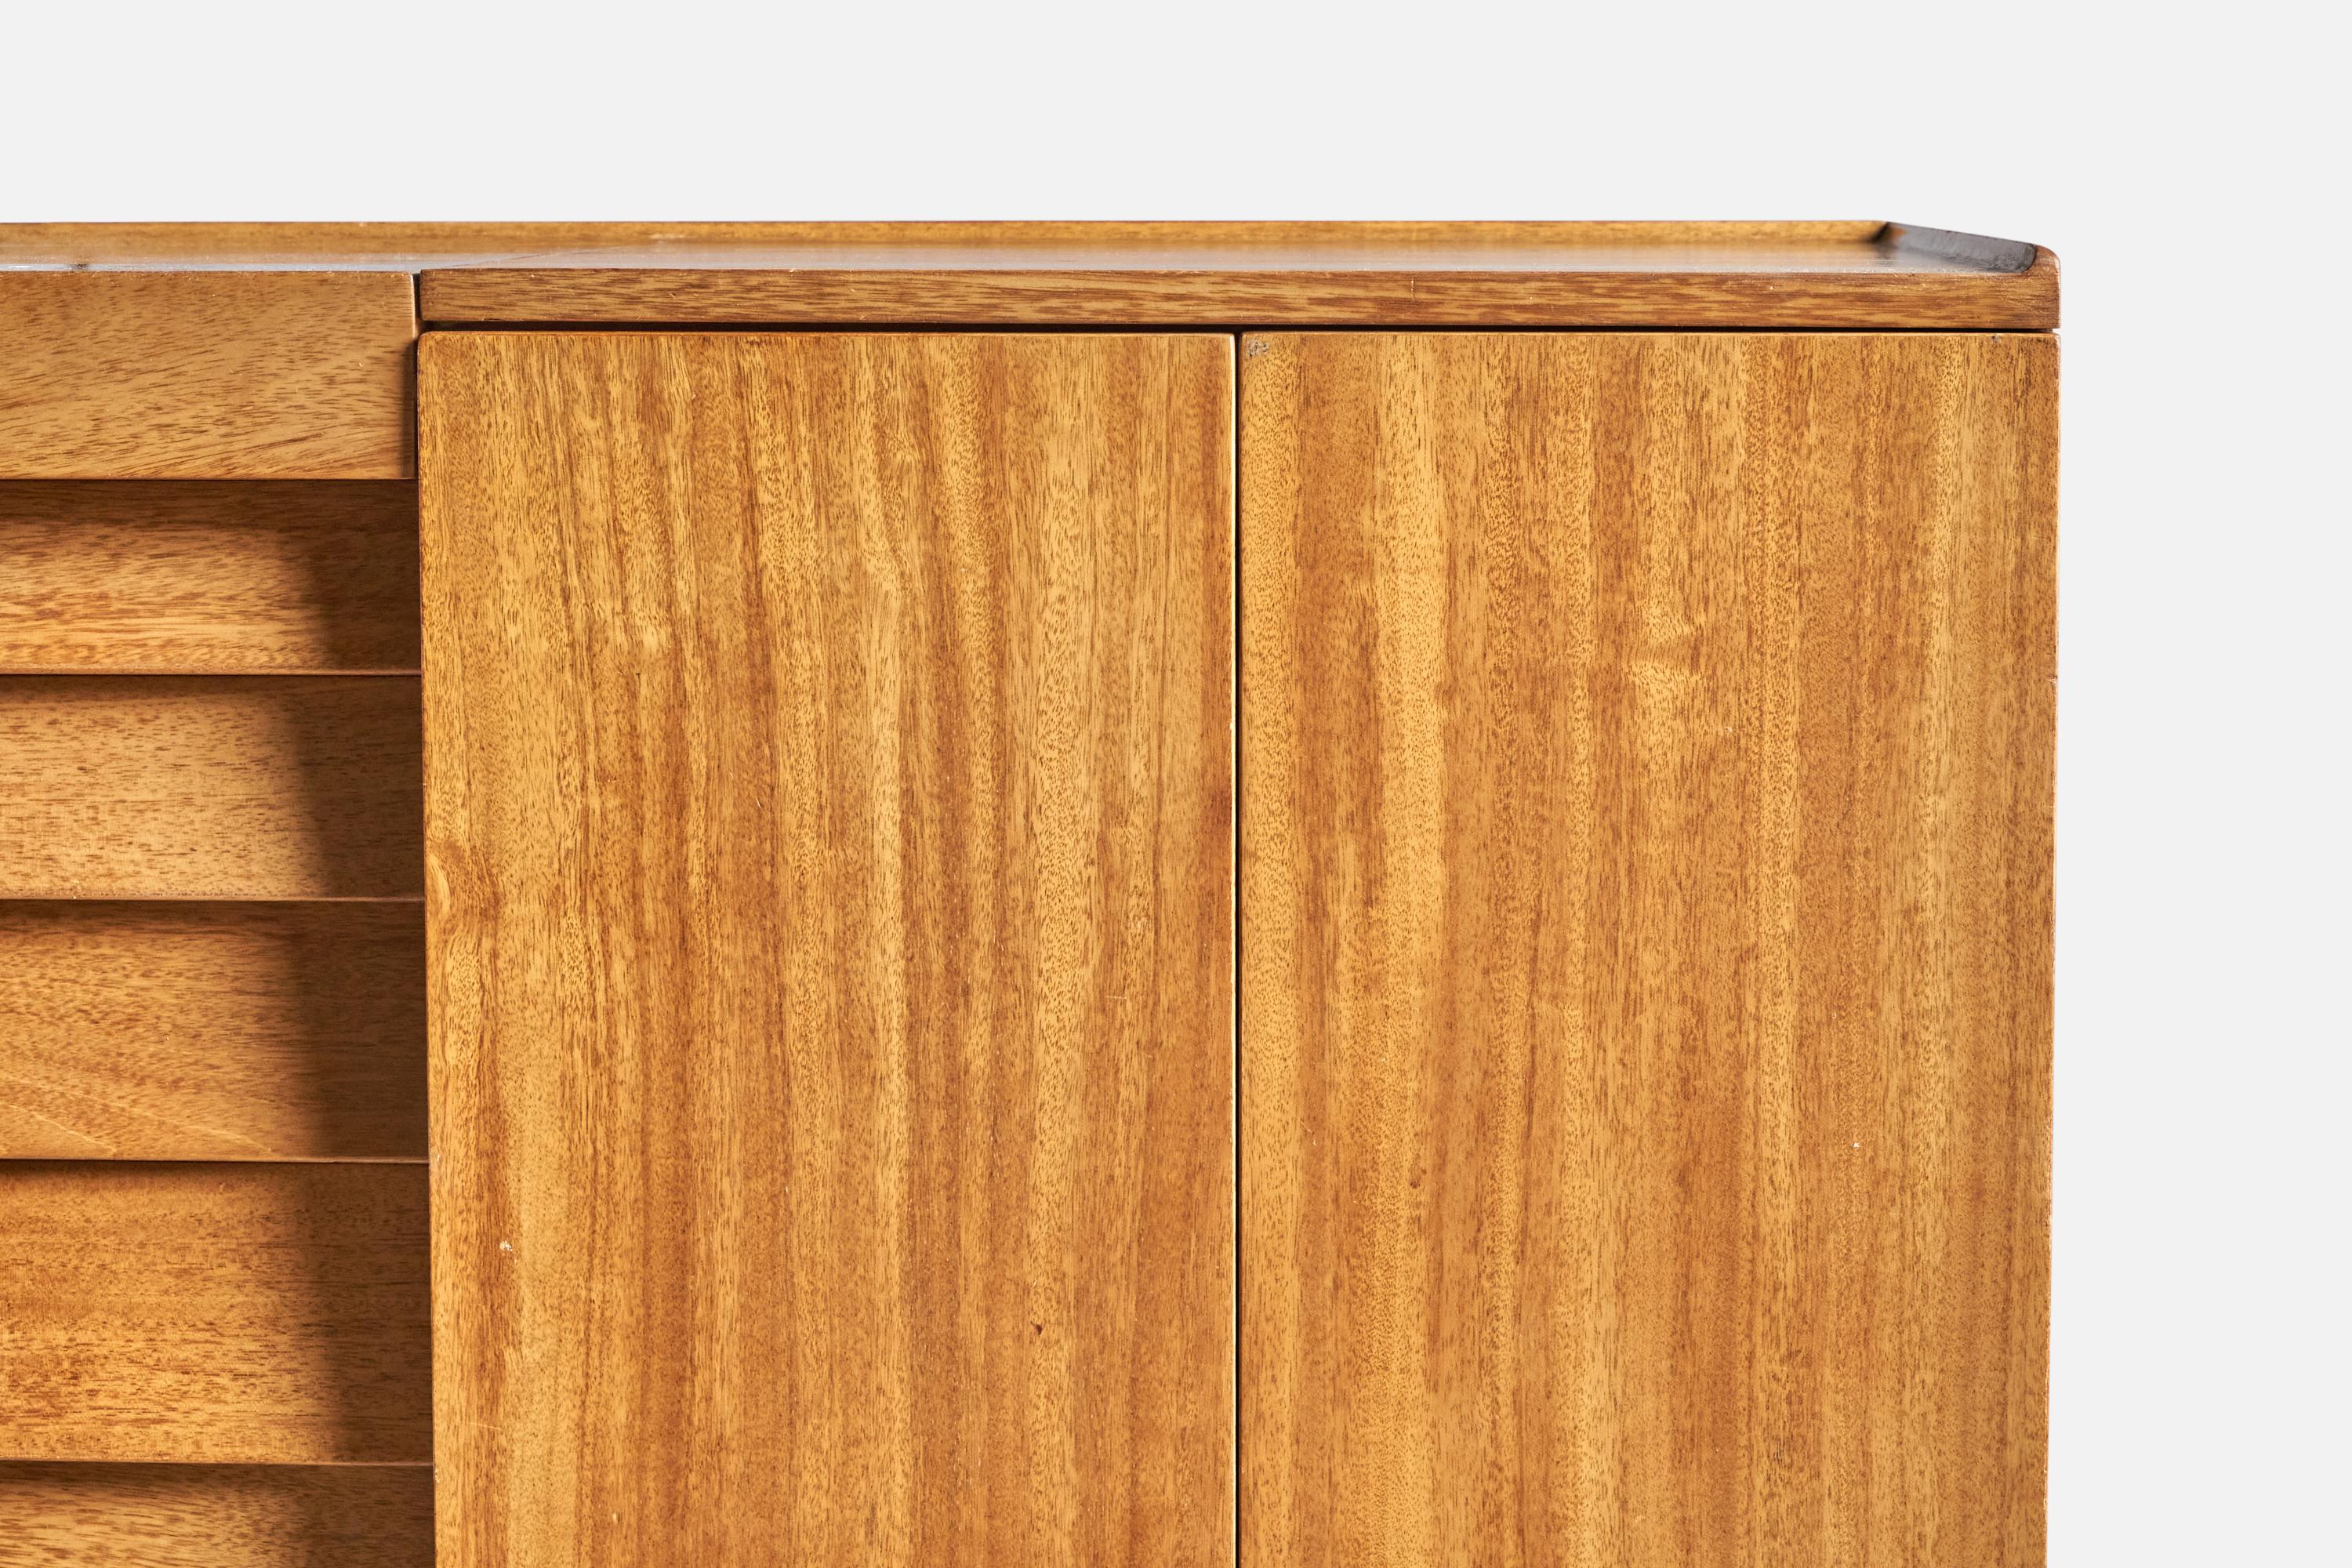 A sizeable walnut wardrobe or cabinet designed by Edward Wormley and produced by Dunbar, Berne, Indiana, USA, c. 1950s.

Interior has glass shelving and backside has round air grids intended for shoe storage.